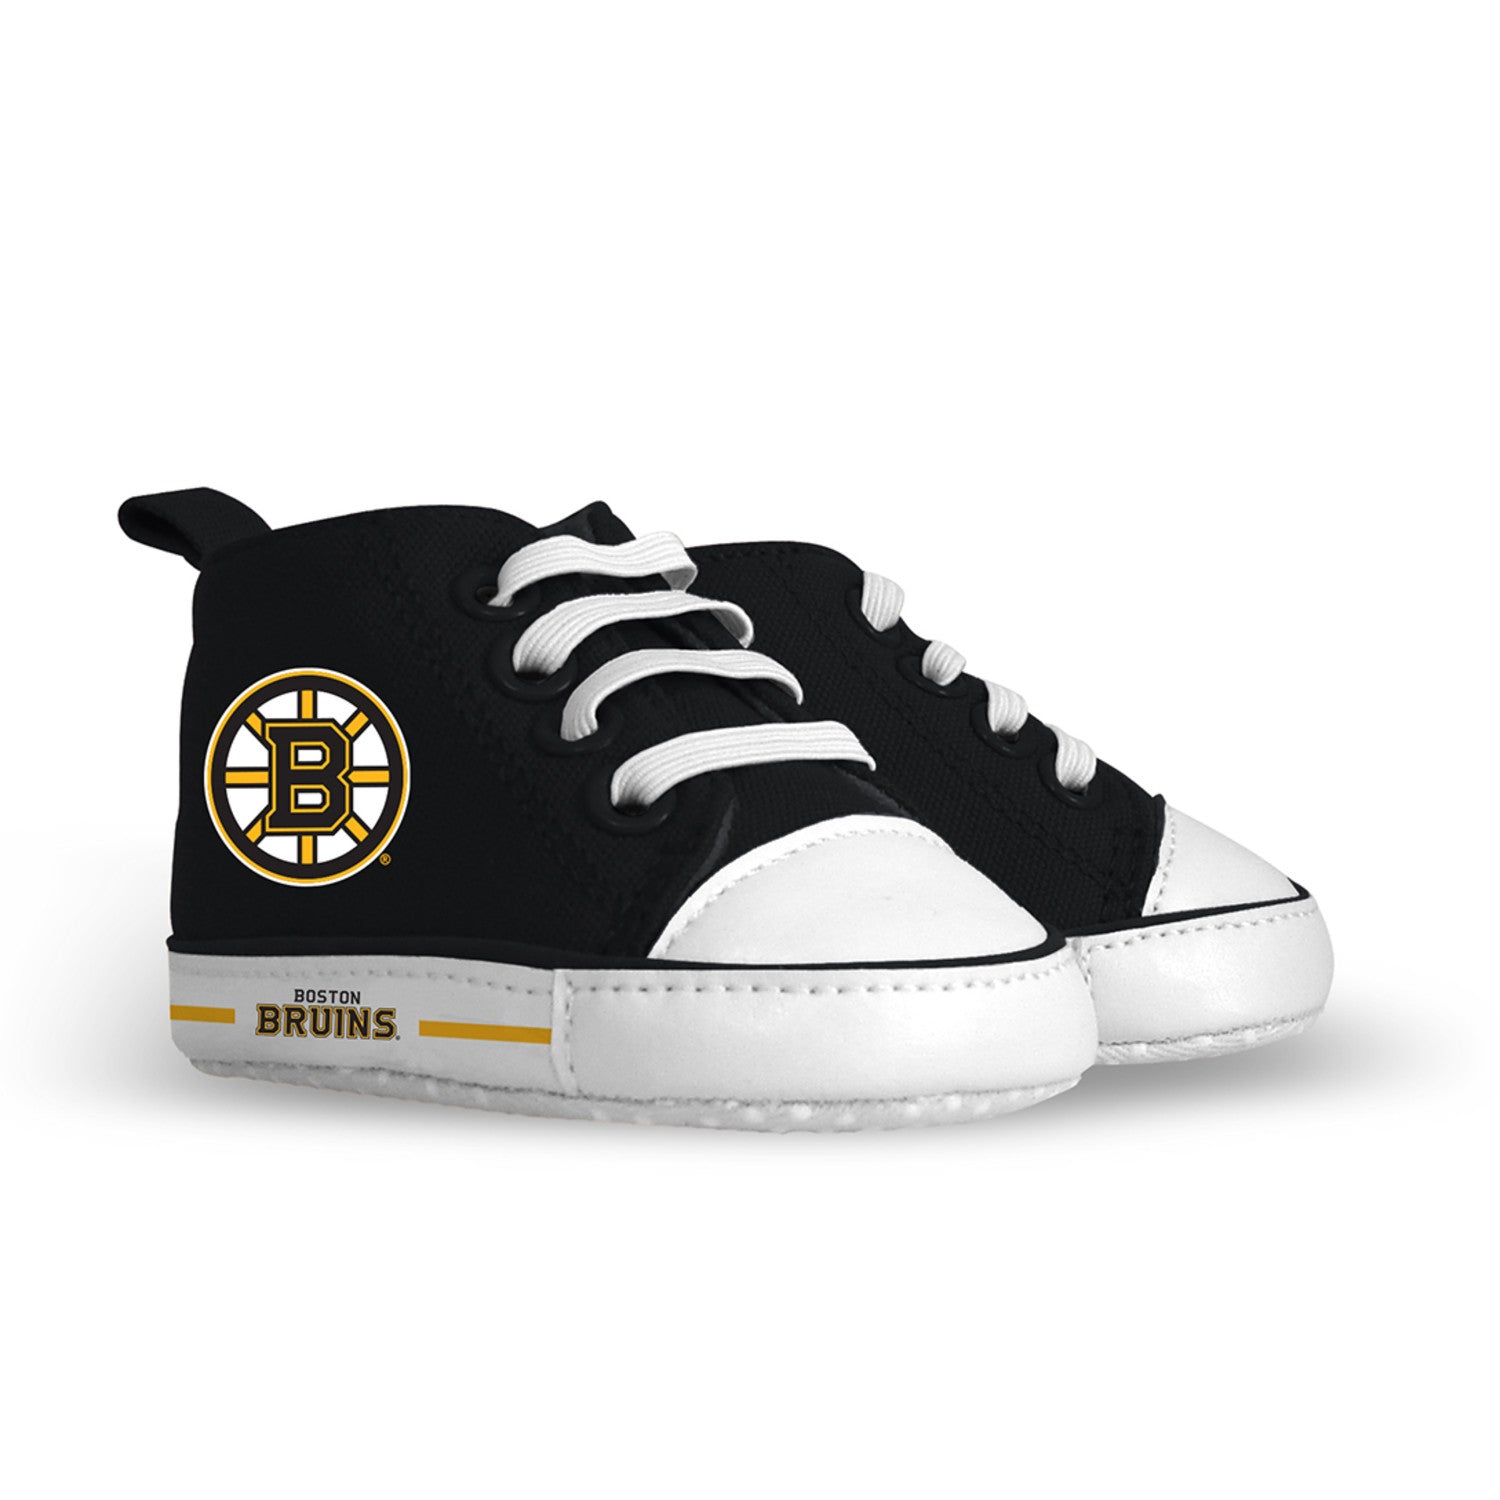 Boston Bruins Baby Shoes